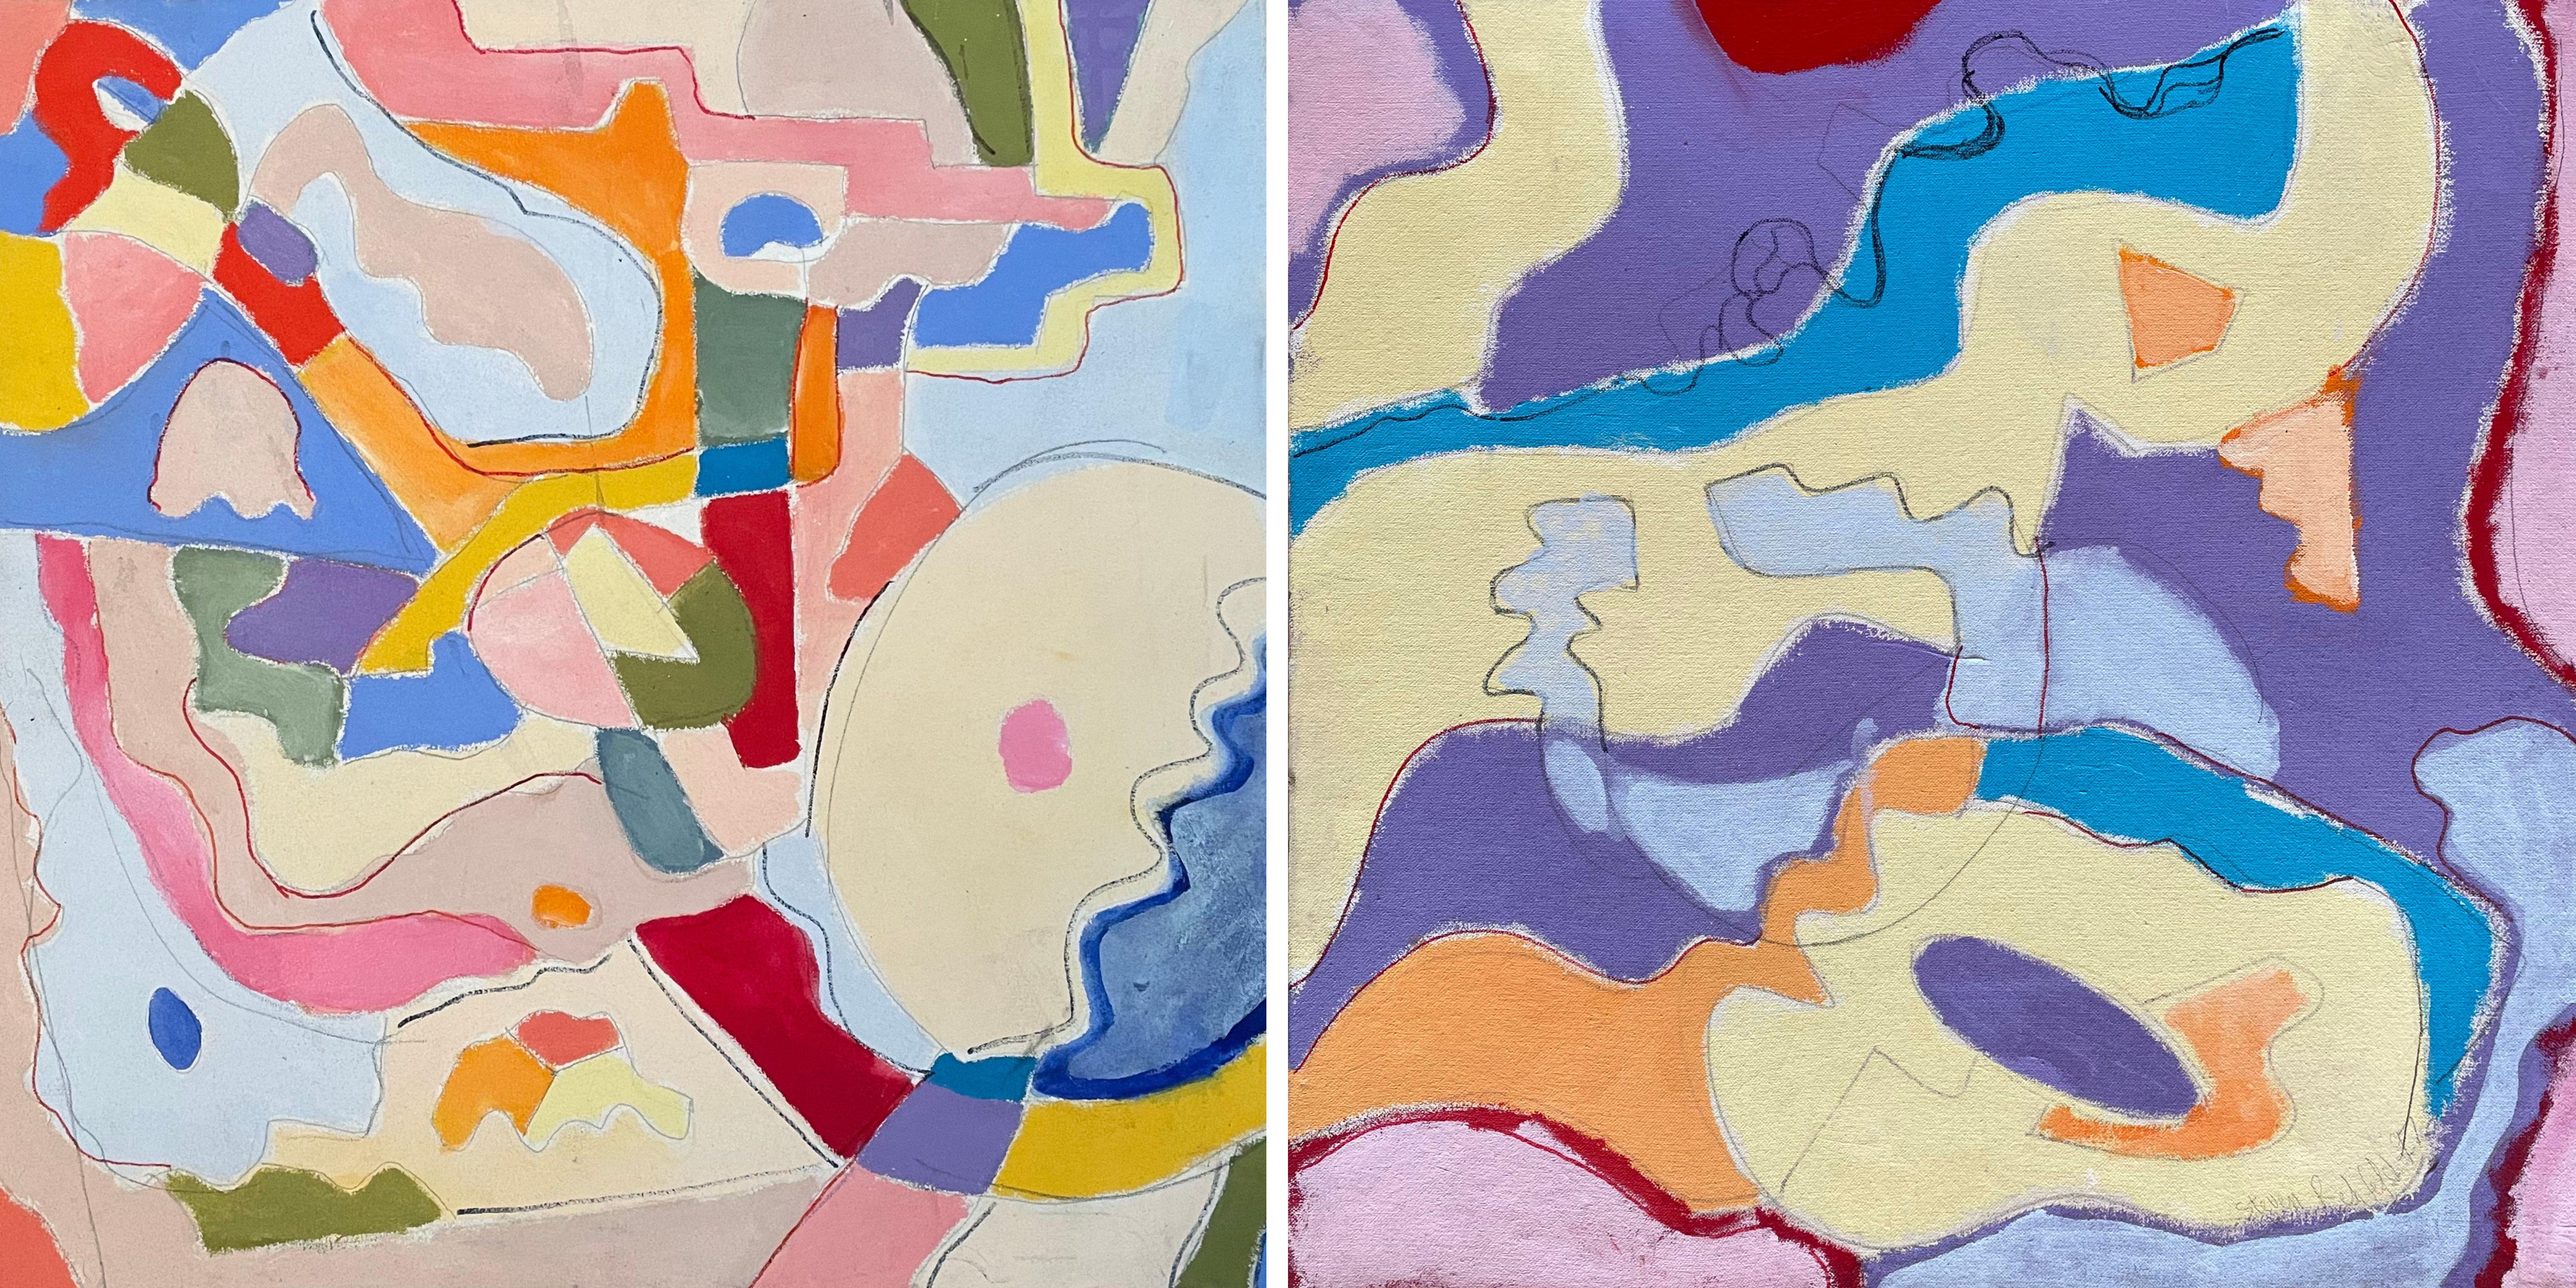 "Coastal" Colorful Diptych Contemporary Abstract by Steven Rehfeld